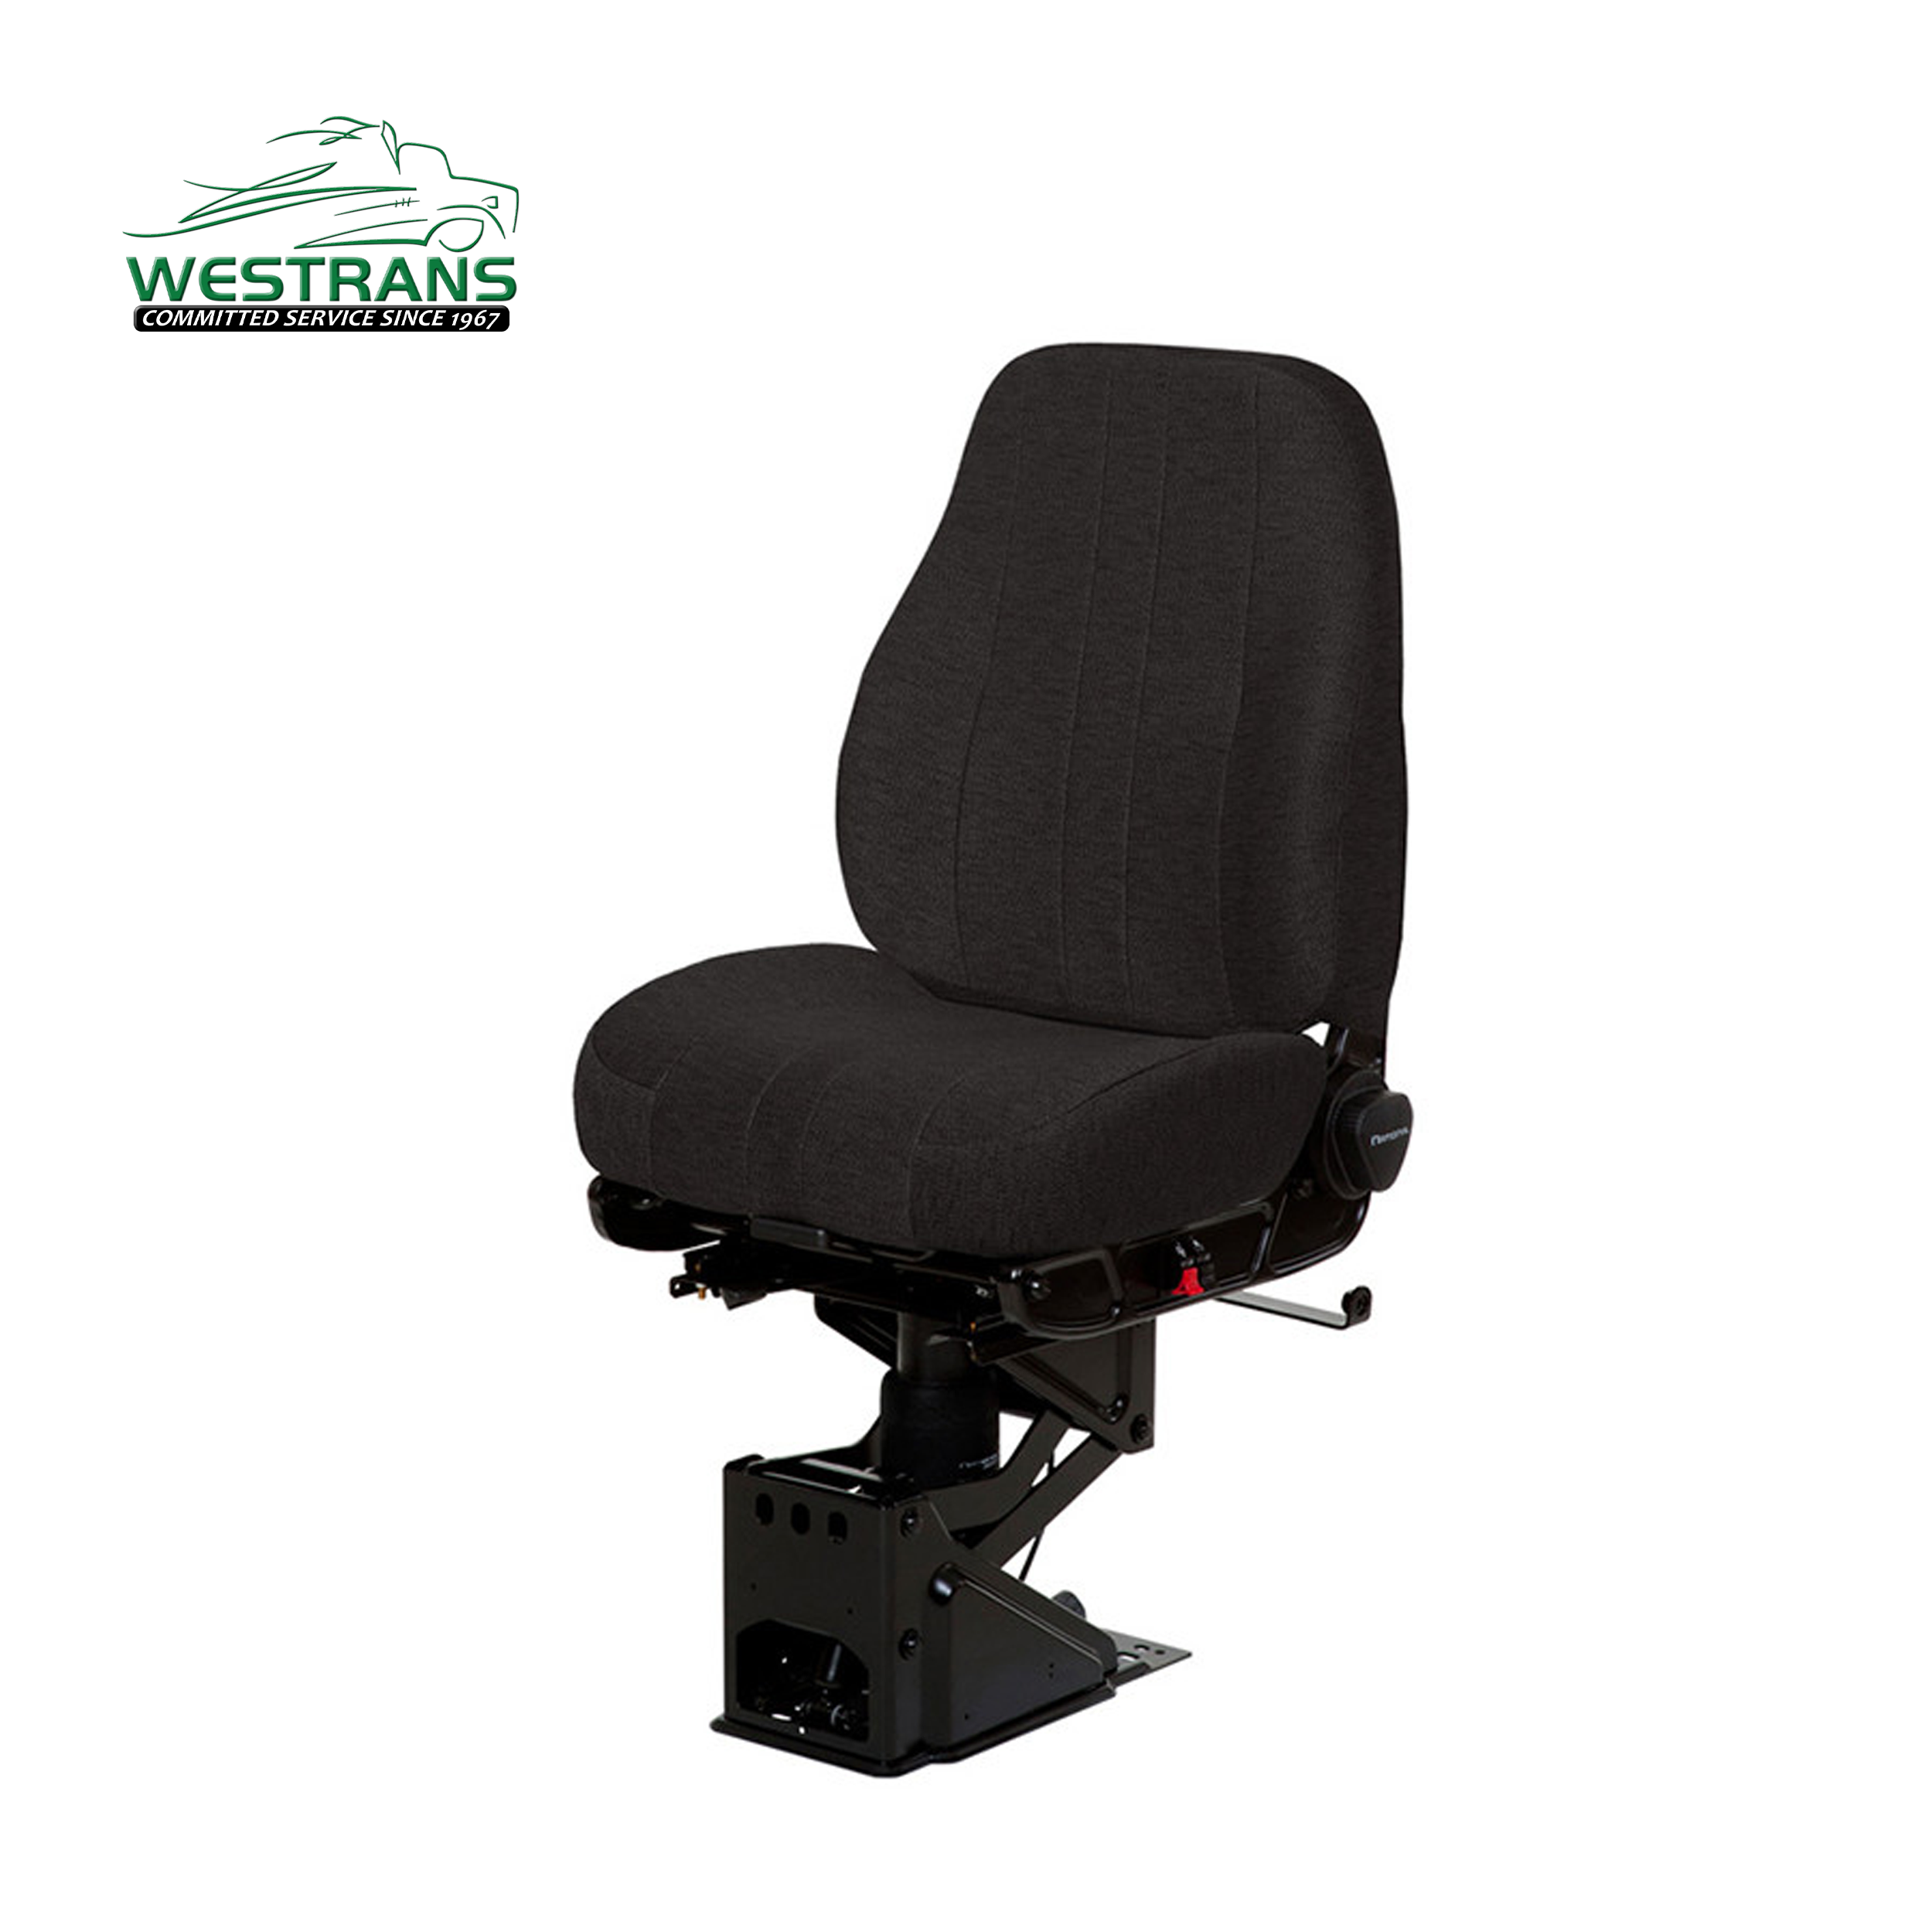 NEW ARRIVALS 50765.065 Mid Back Seat